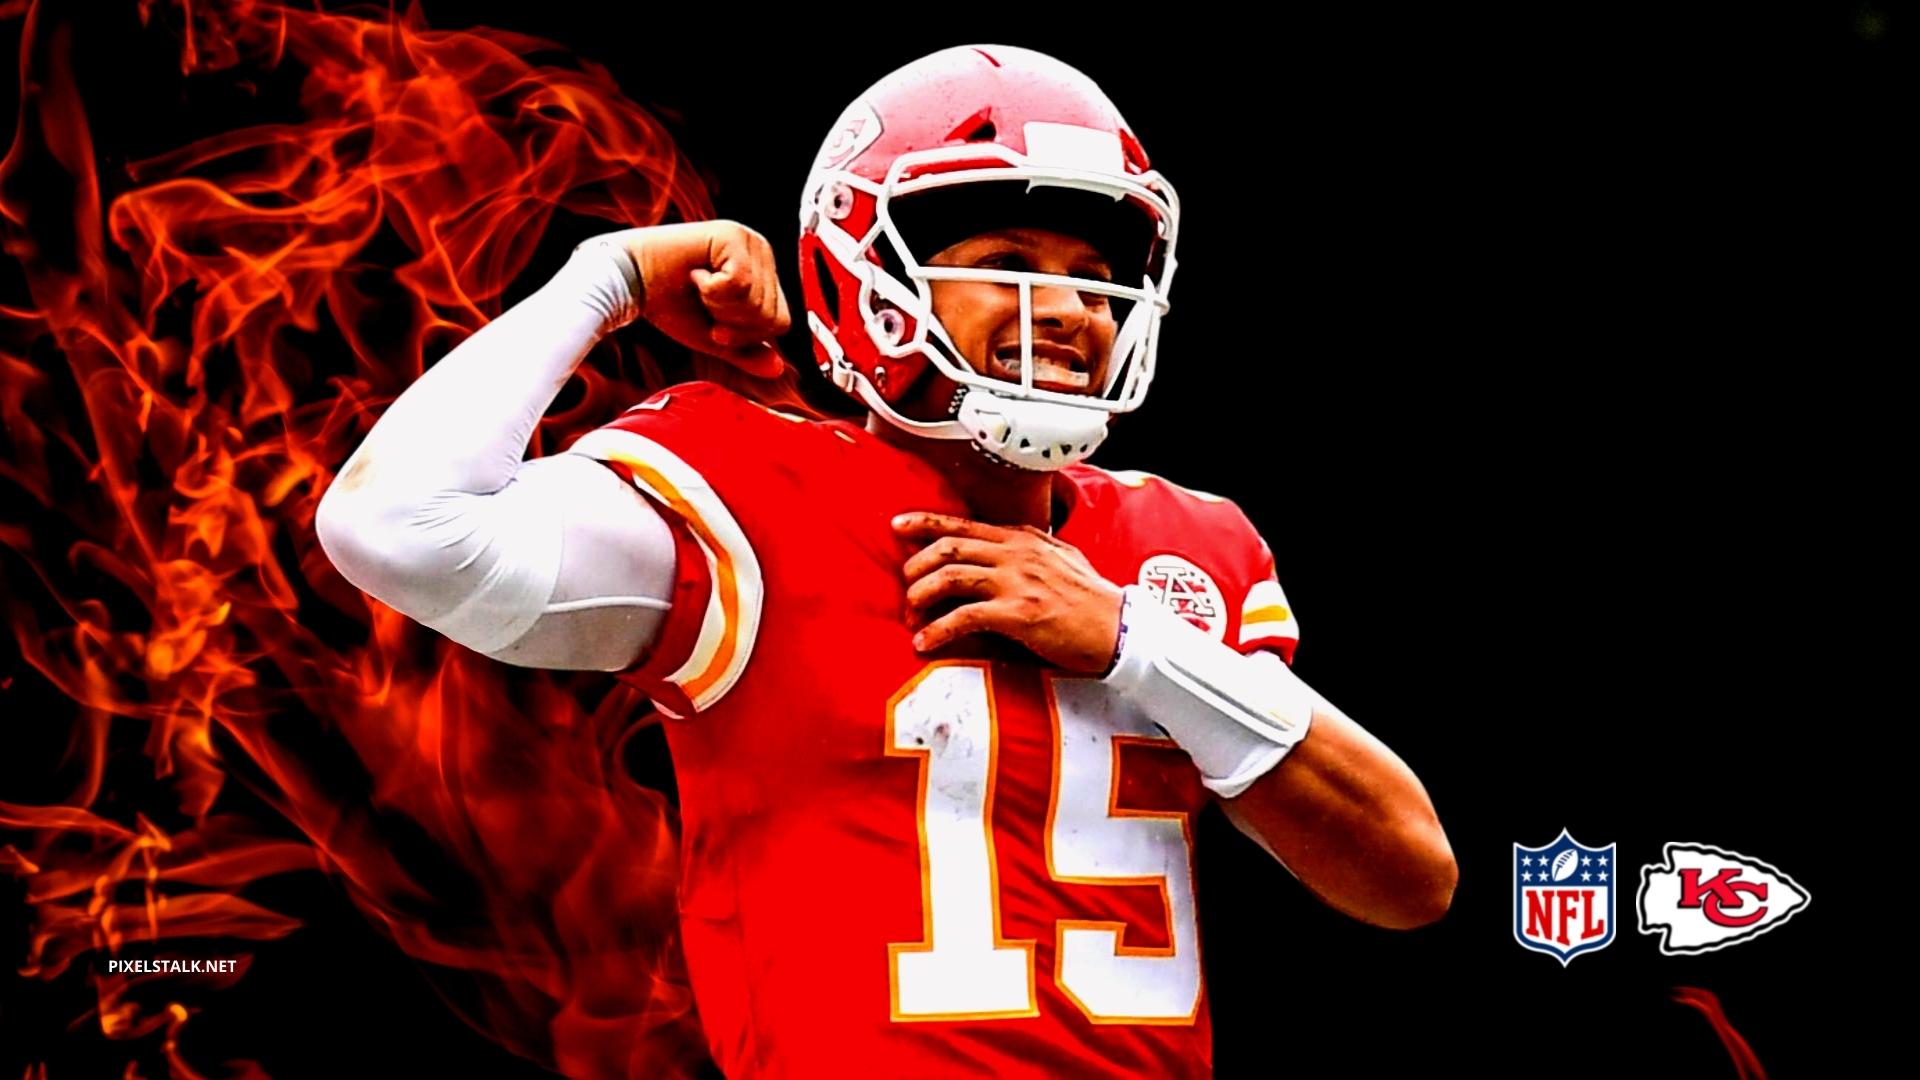 Download Patrick Mahomes Wallpaper by chiefsphan  20  Free on ZEDGE now  Browse millions of p  Kansas city chiefs football Chiefs wallpaper  Sports wallpapers